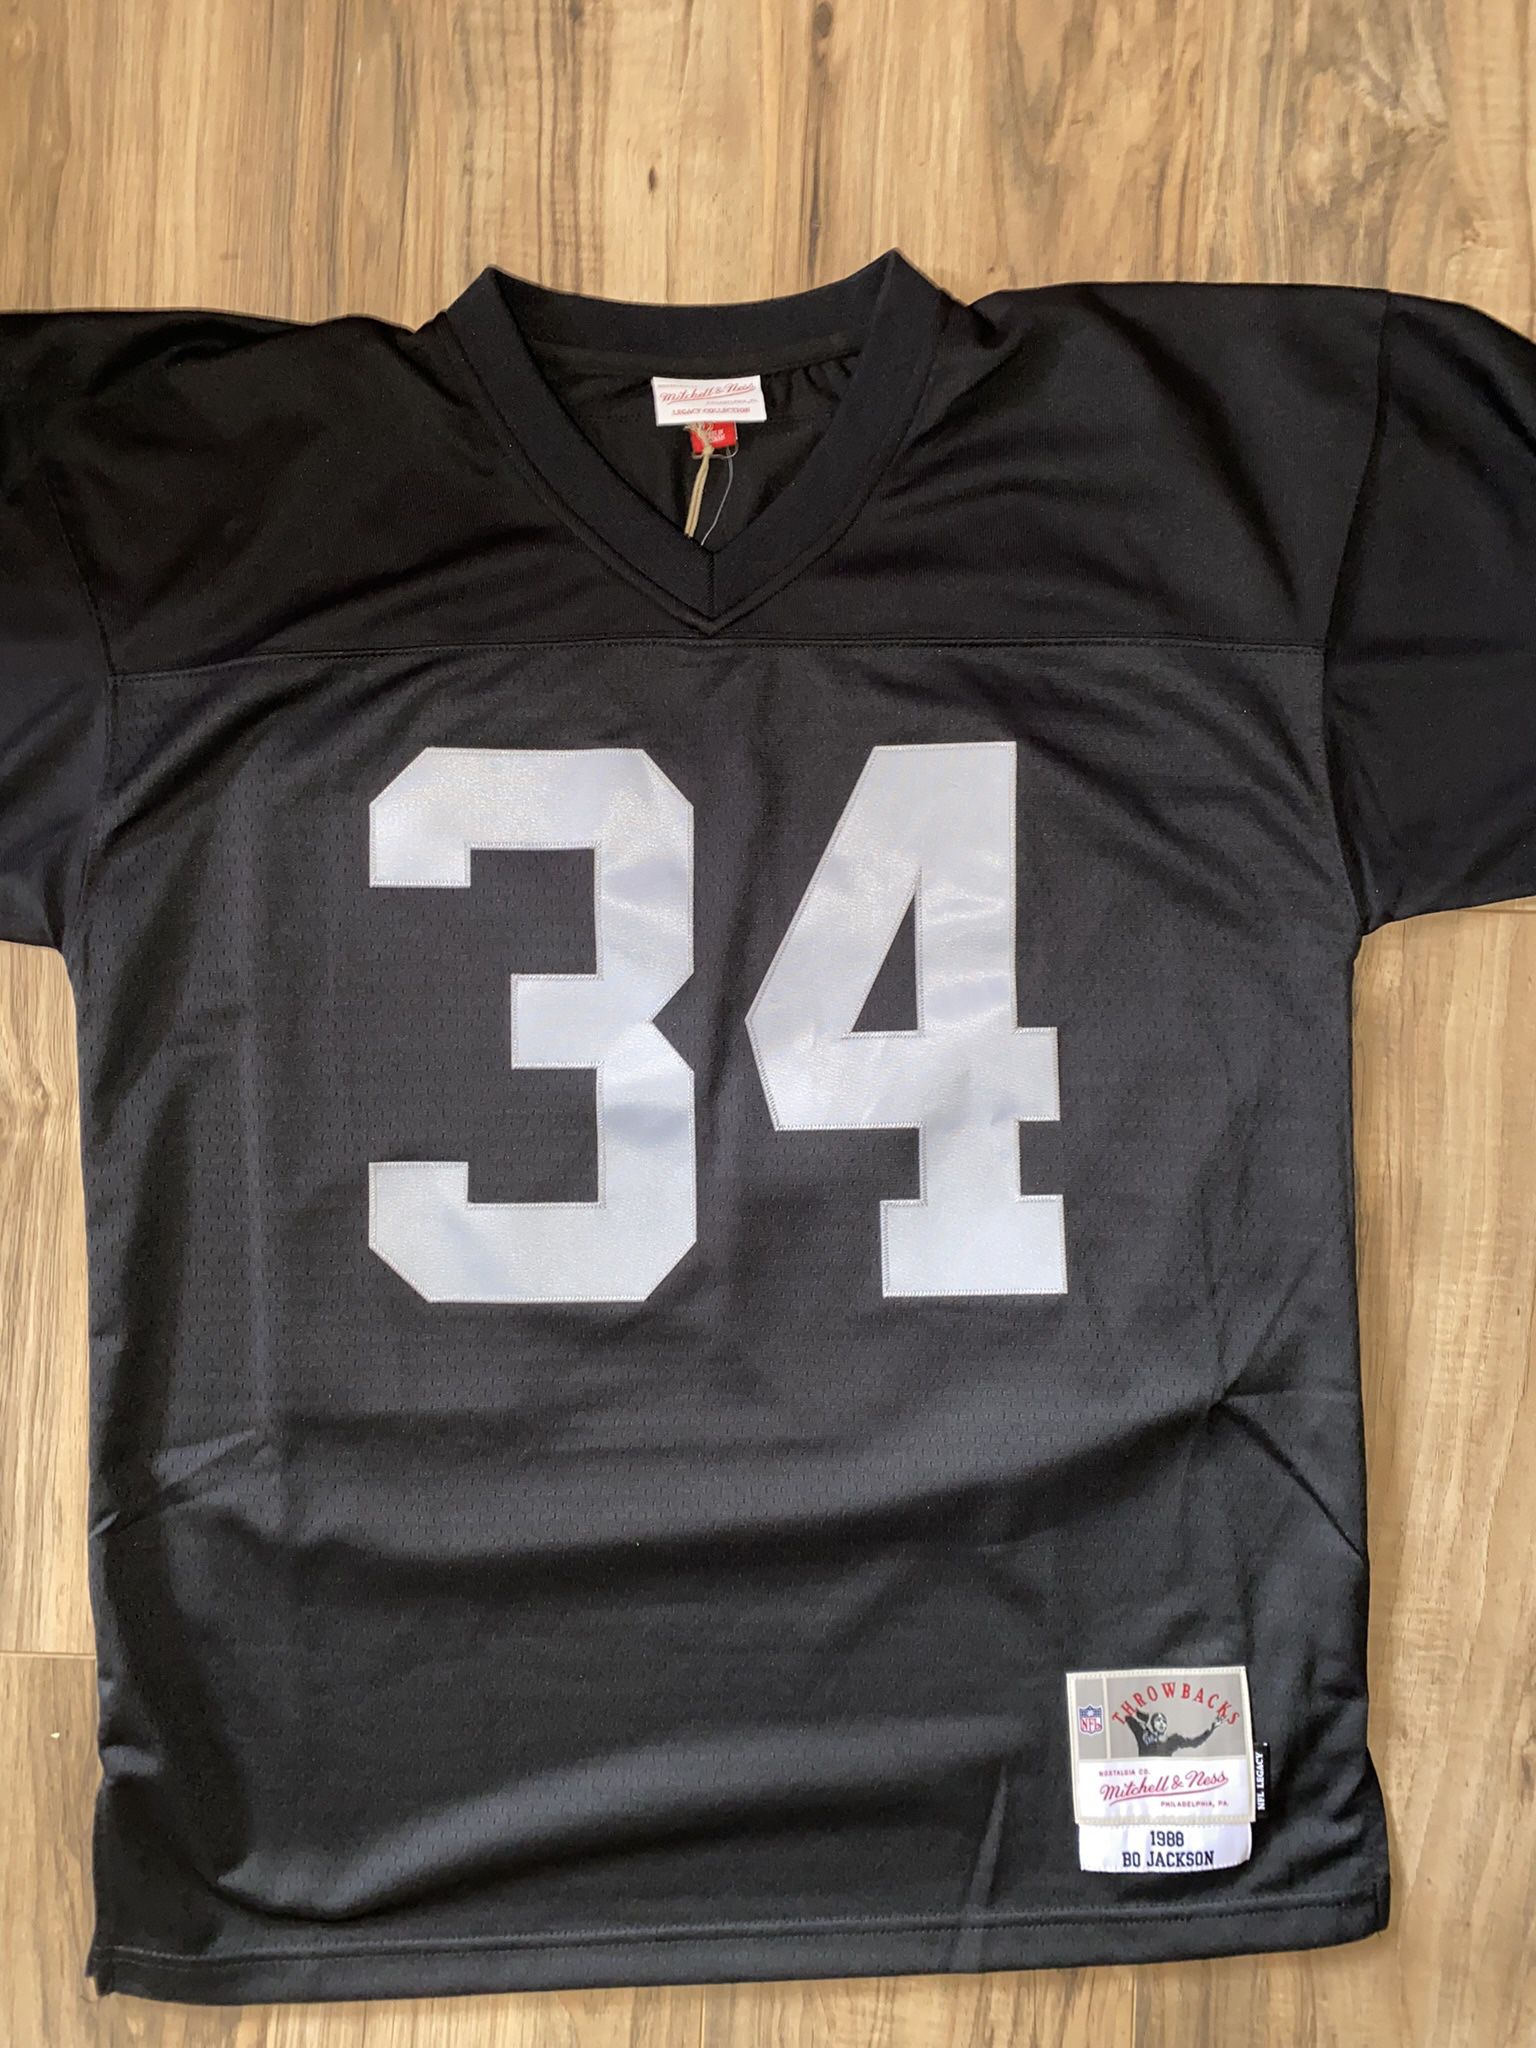 New Men's Large Mitchell & Ness Raiders Bo Jackson Jersey for